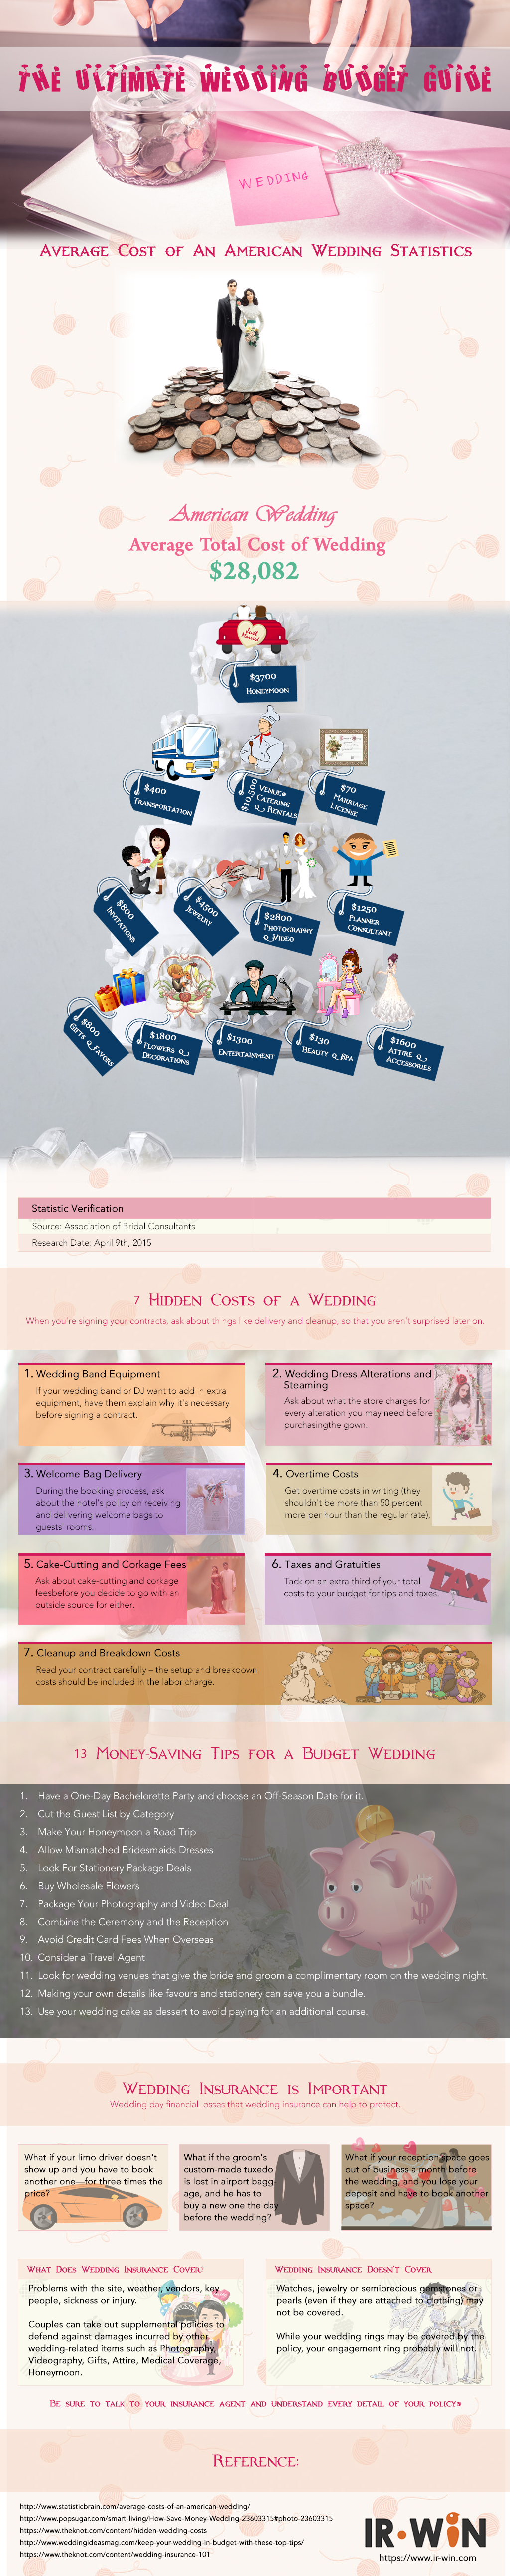 The Ultimate Wedding Budget Guide – An Infographic